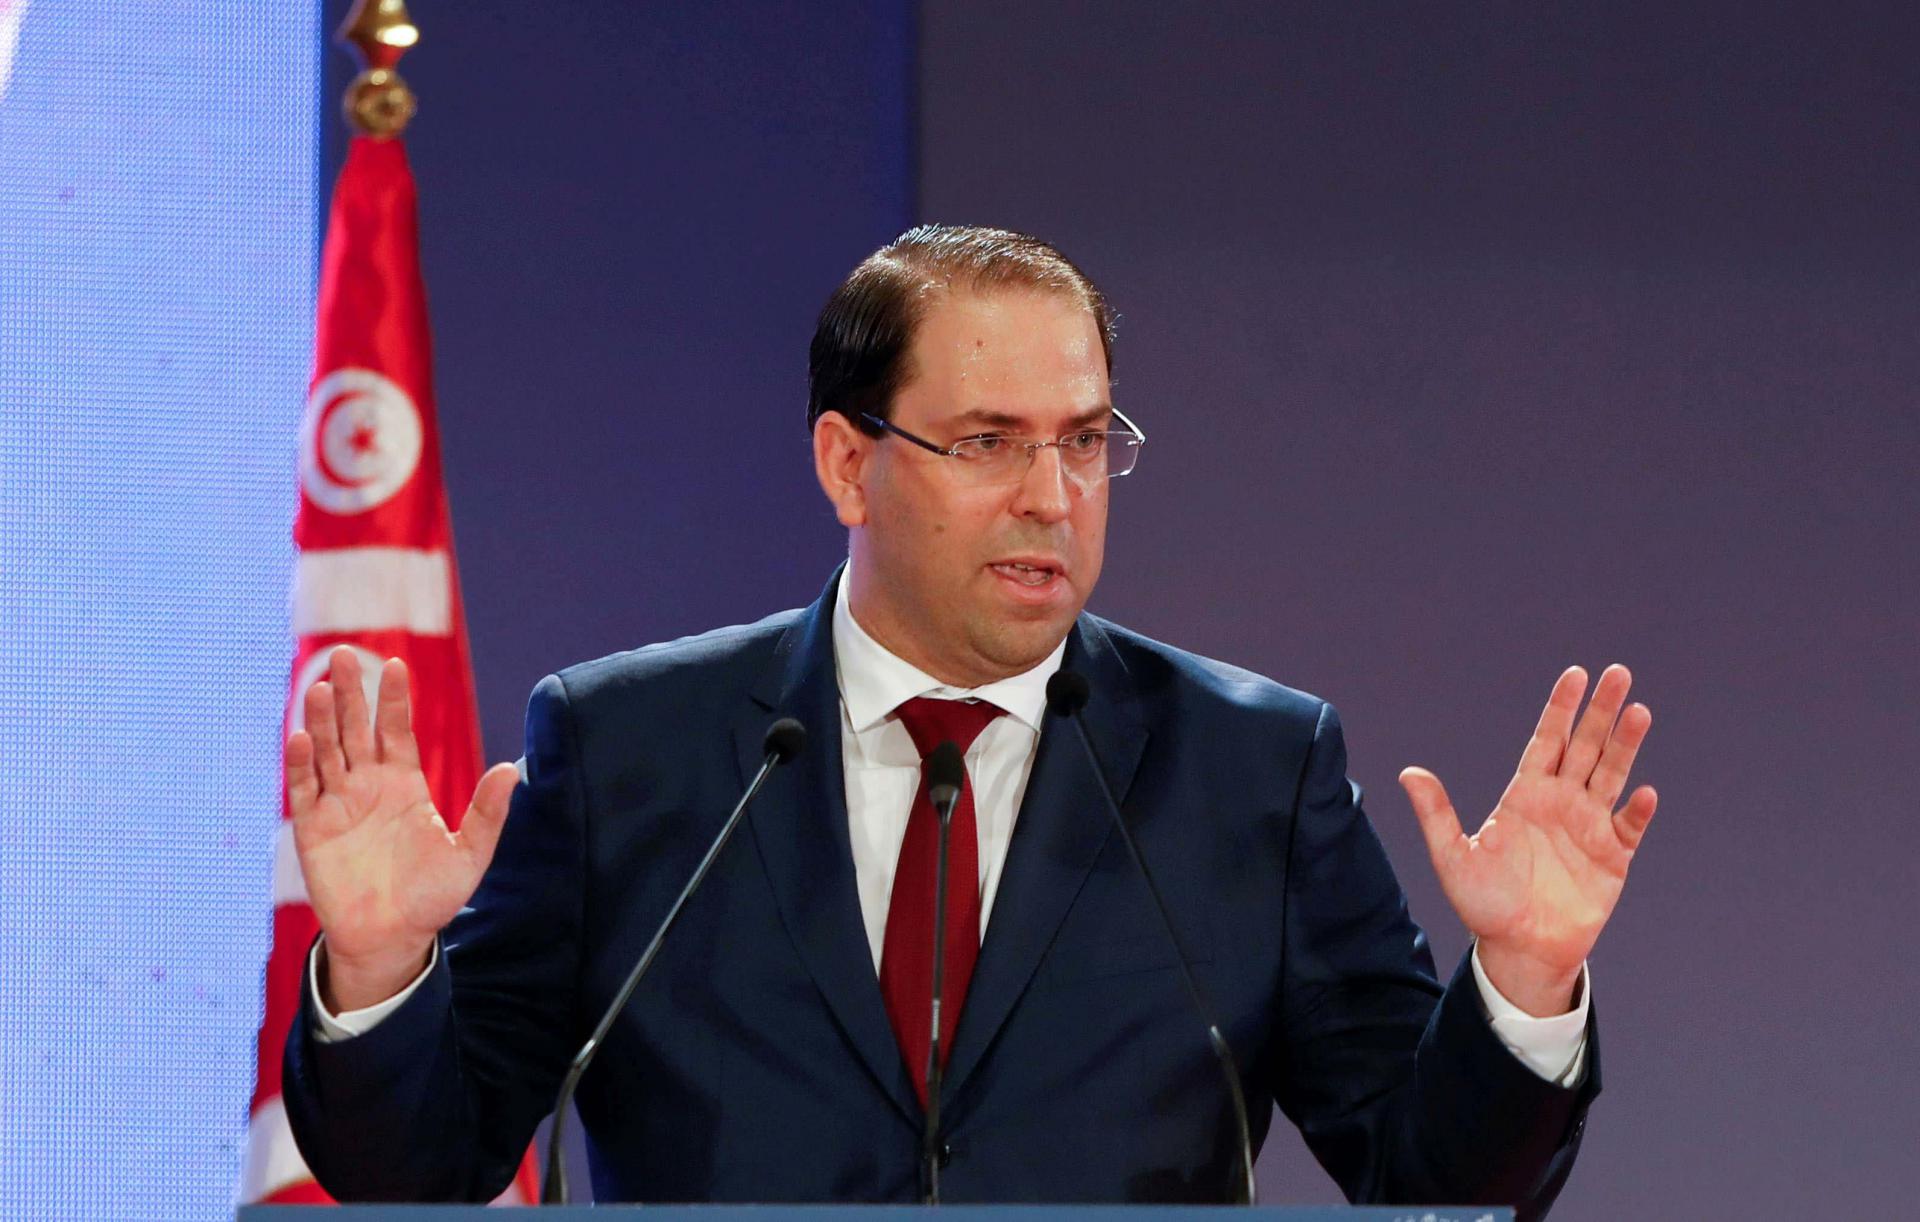 Chahed has been in the hot seat for months due to his tussle with Hafedh Caid Essebsi, who is reported to have presidential ambitions